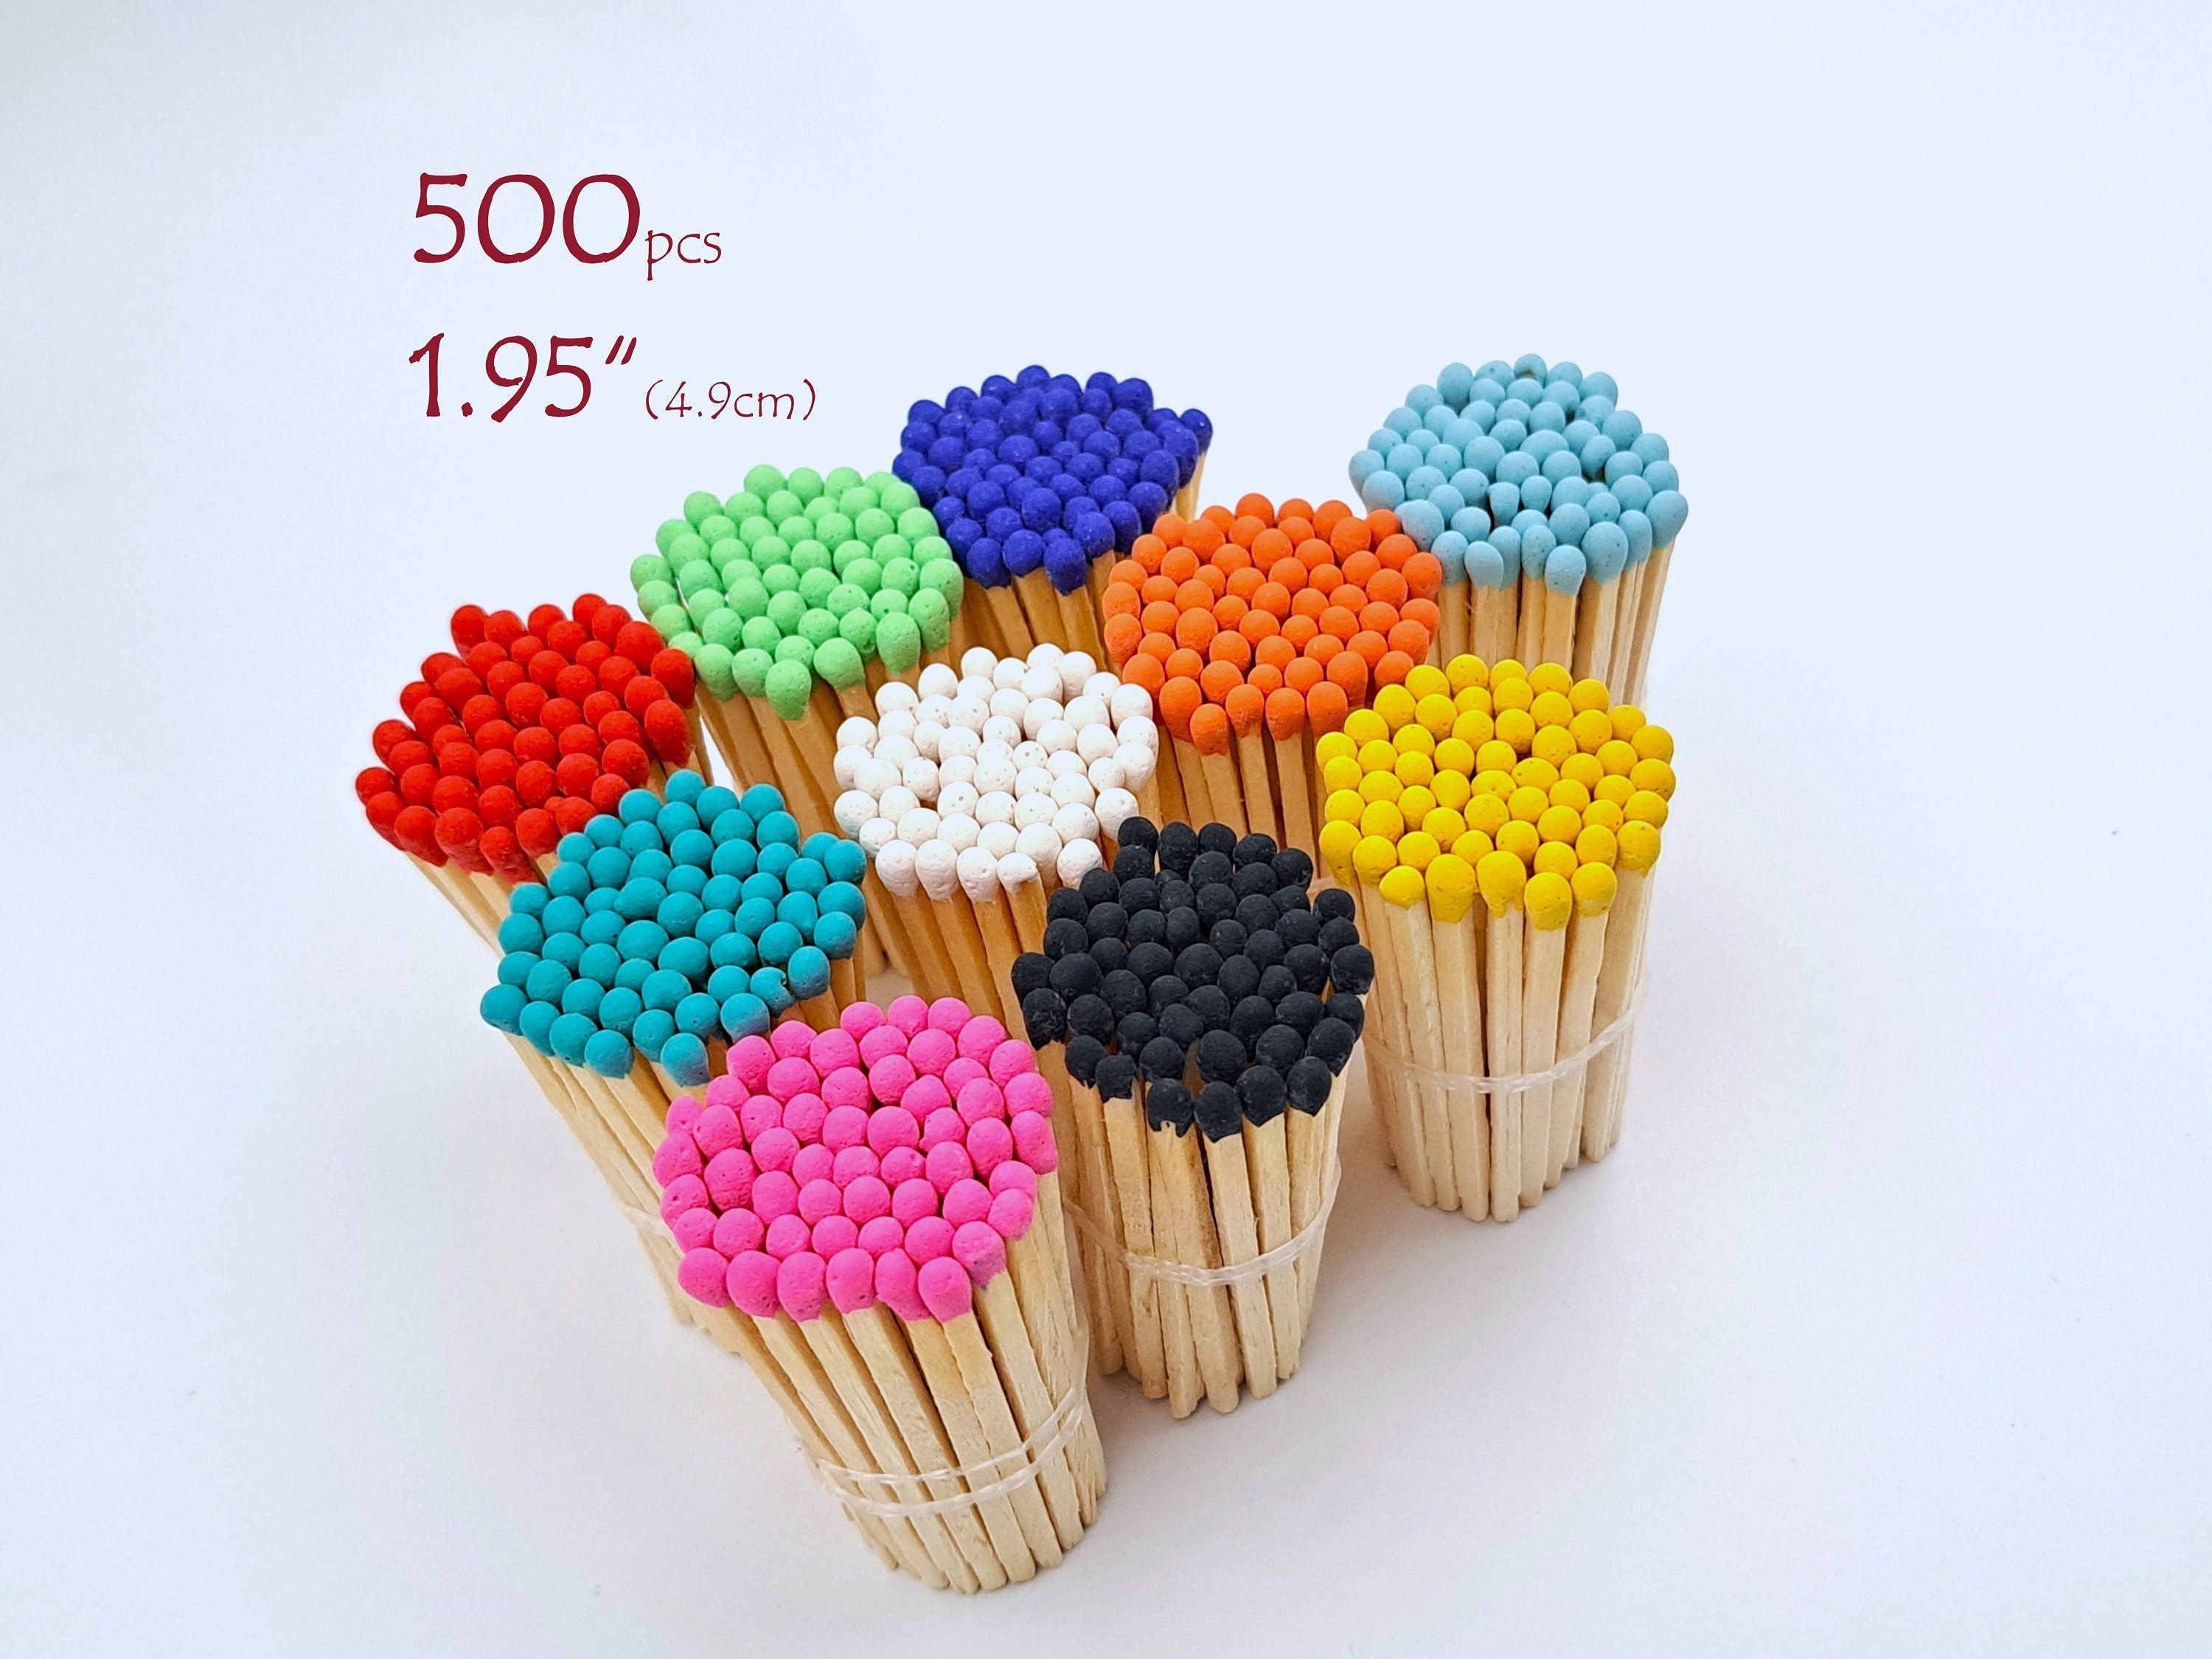 200Pcs 3'' Decorative Rainbow Matches, Premium Long Wooden Safety Matches  for Candles, Lighting Candles, Long Wooden Candle Matches Matchsticks for